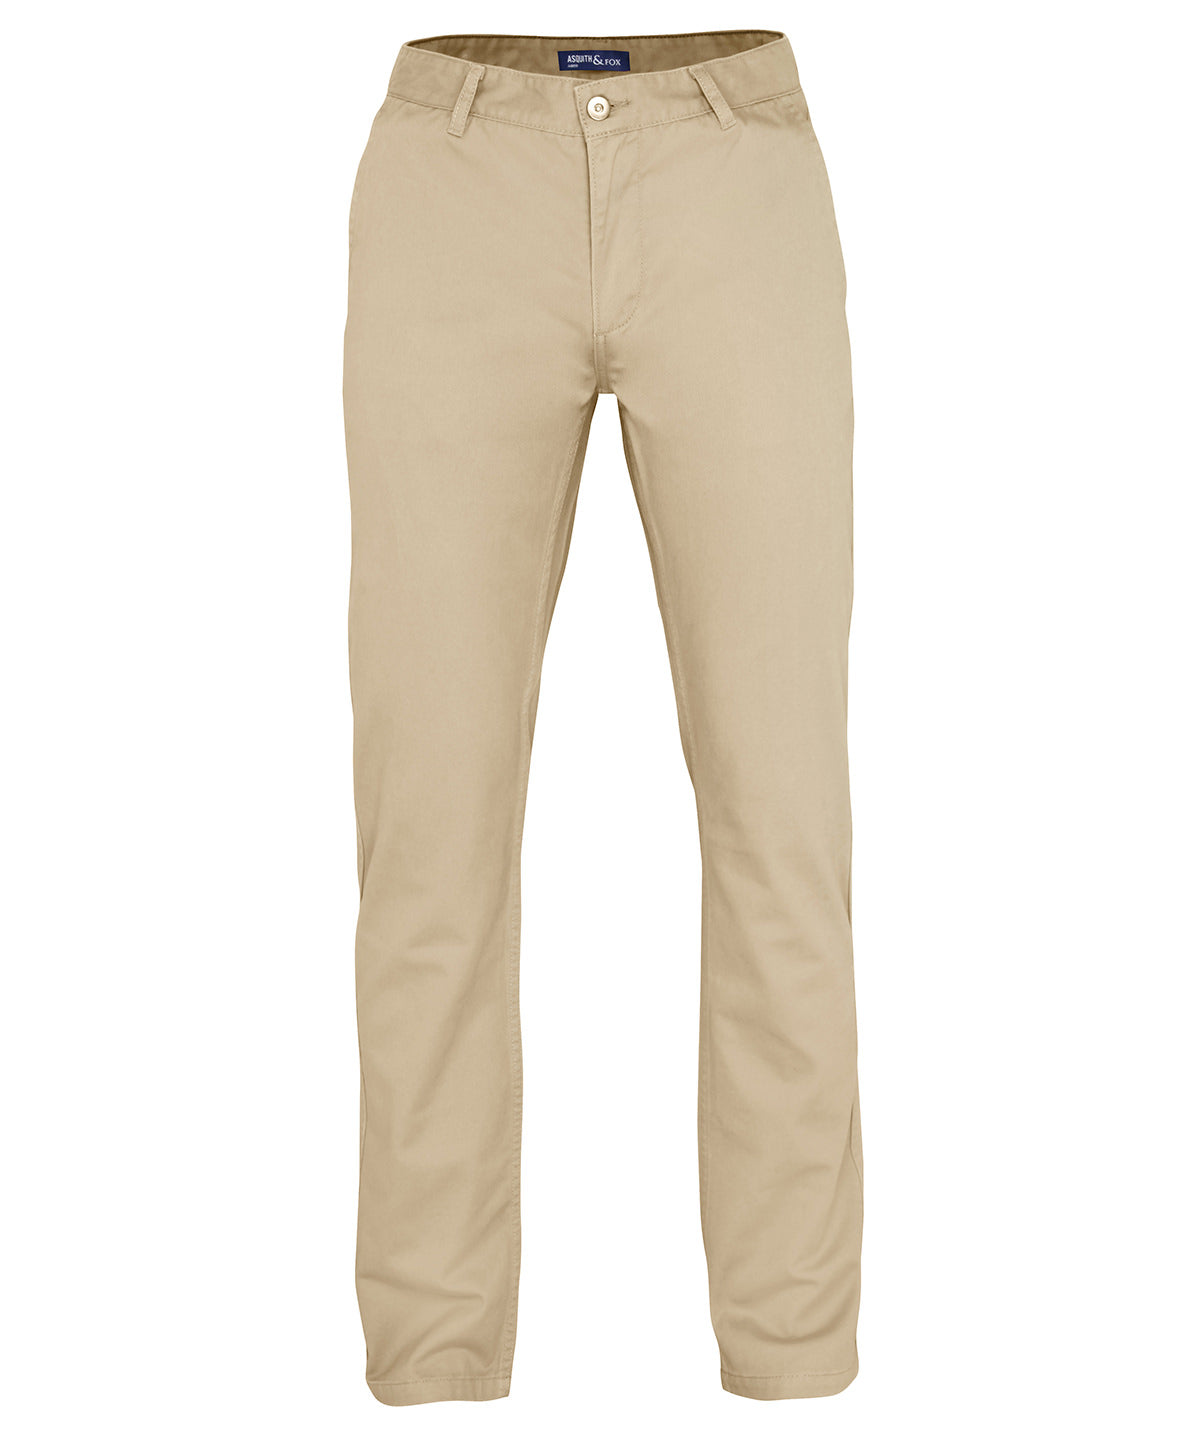 Personalised Trousers - Natural Asquith & Fox Men's chinos